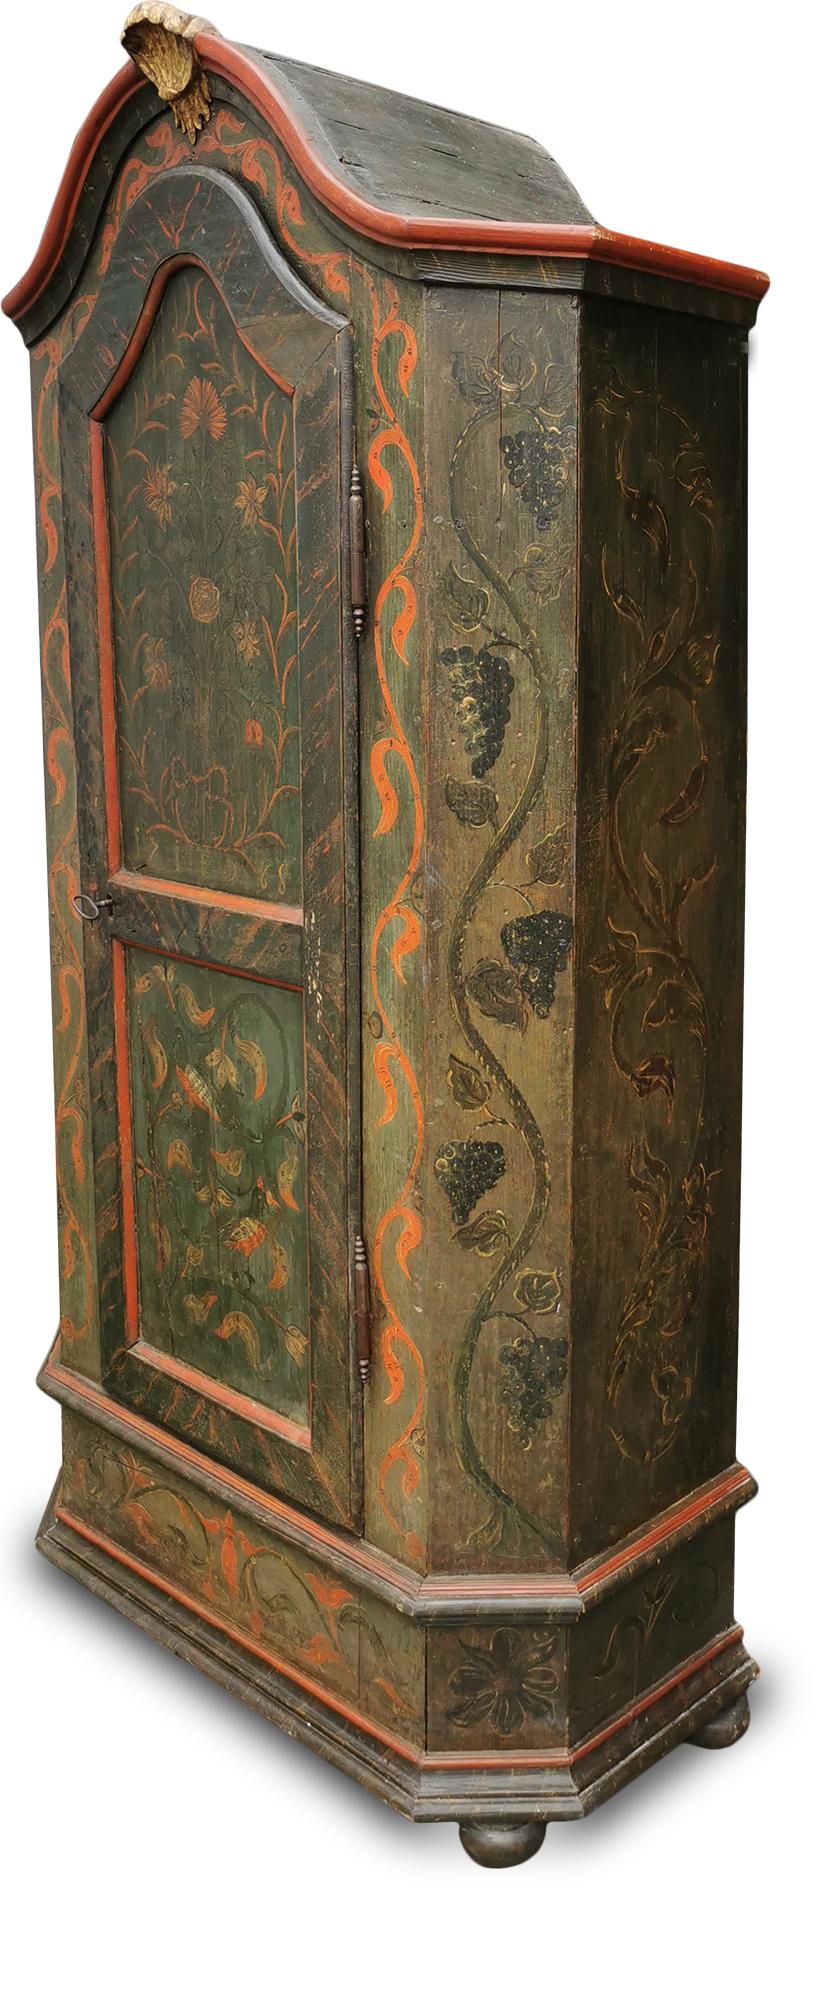 Tyrolean painted cabinet dated 1768

Measures: H. 180cm – W. 95cm (100 to the frames) – D. 40cm (45 to the frames)

Beautiful painted wardrobe, with unusual shapes and decorations. The entire surface is painted in dark green, with floral motifs,